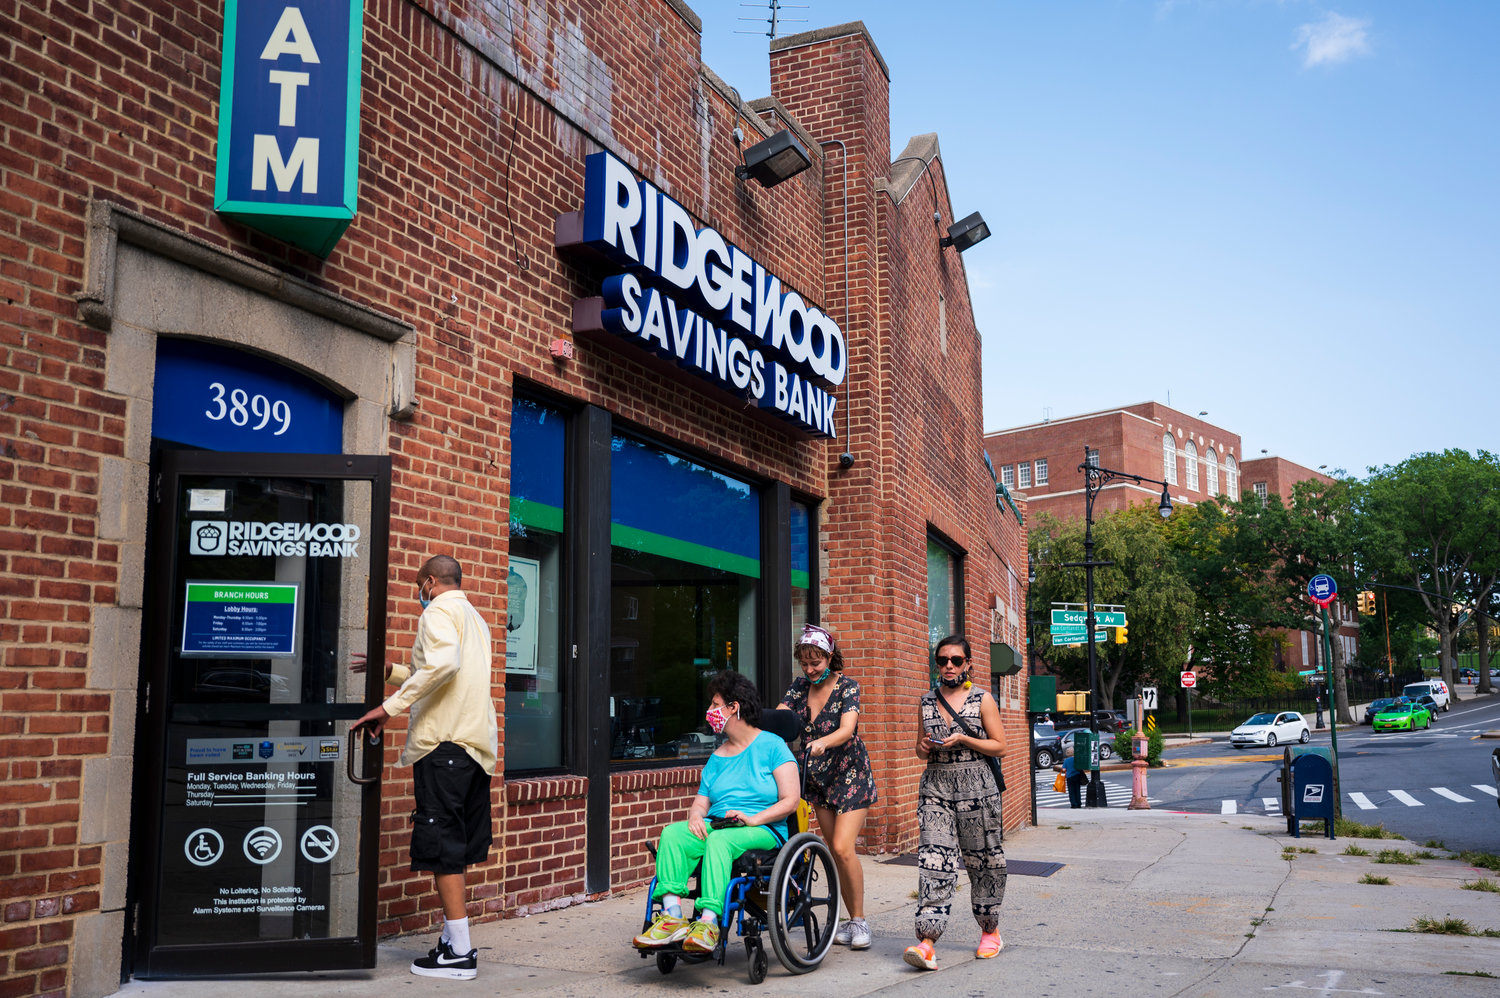 Until a couple of weeks ago, it looked as if Ridgewood Savings Bank in Van Cortlandt Village would be just the latest local financial institution to shutter. But thanks to an effort led by Community Board 8 and others, Ridgewood renewed its lease to keep its 3899 Sedgwick Ave., branch open.